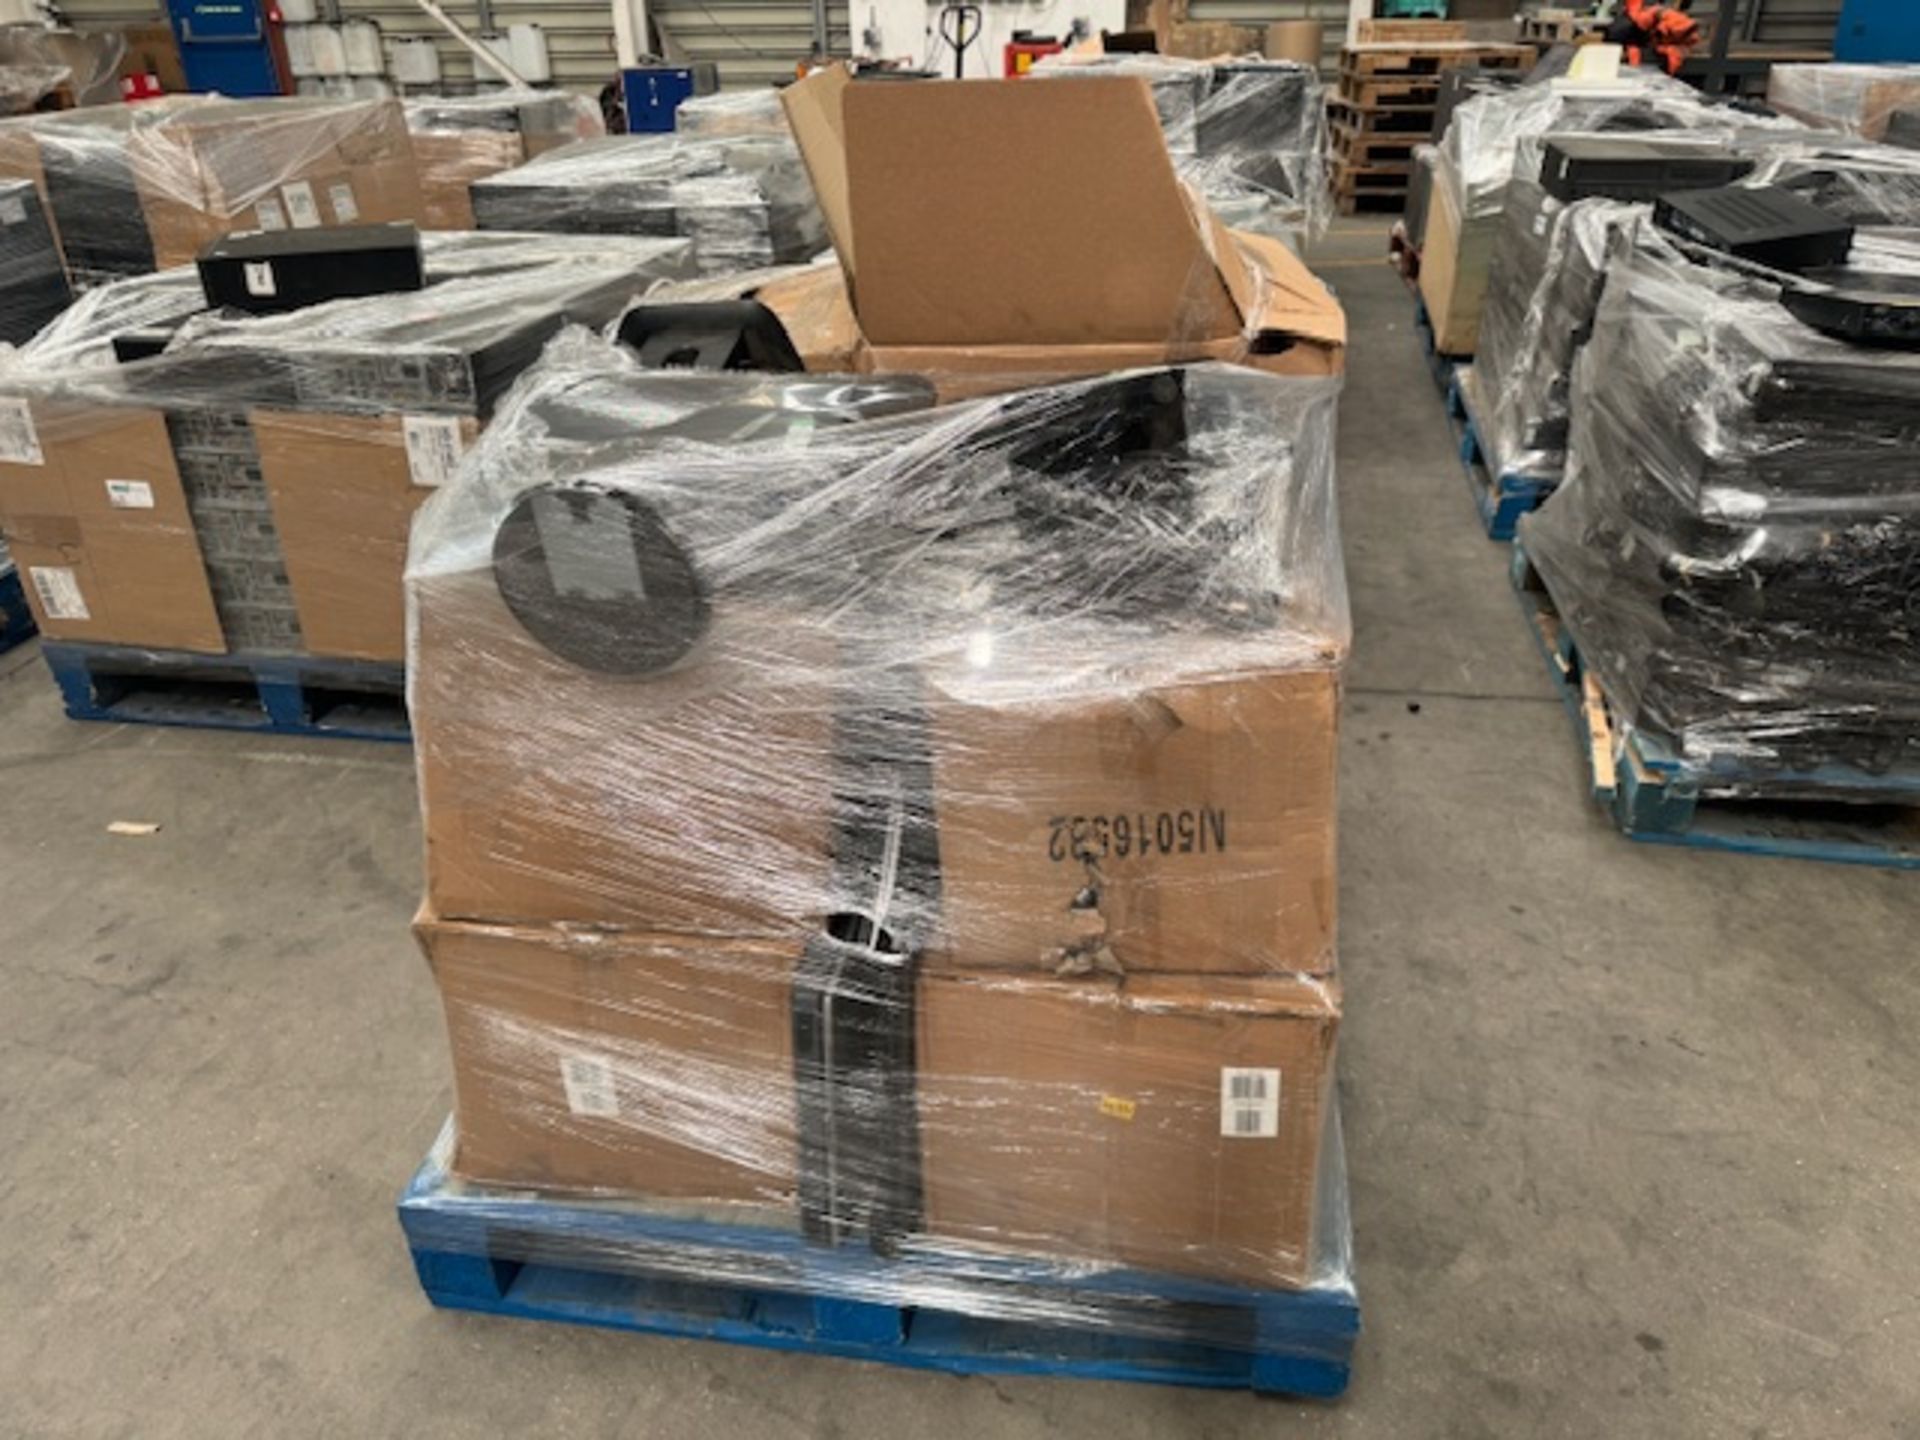 IT PALLET LOT INCLUDING DELL MONITORS, KEYBOARDS, LAPTOPS AND MUCH MORE PRICE NEW 6K - Image 2 of 4